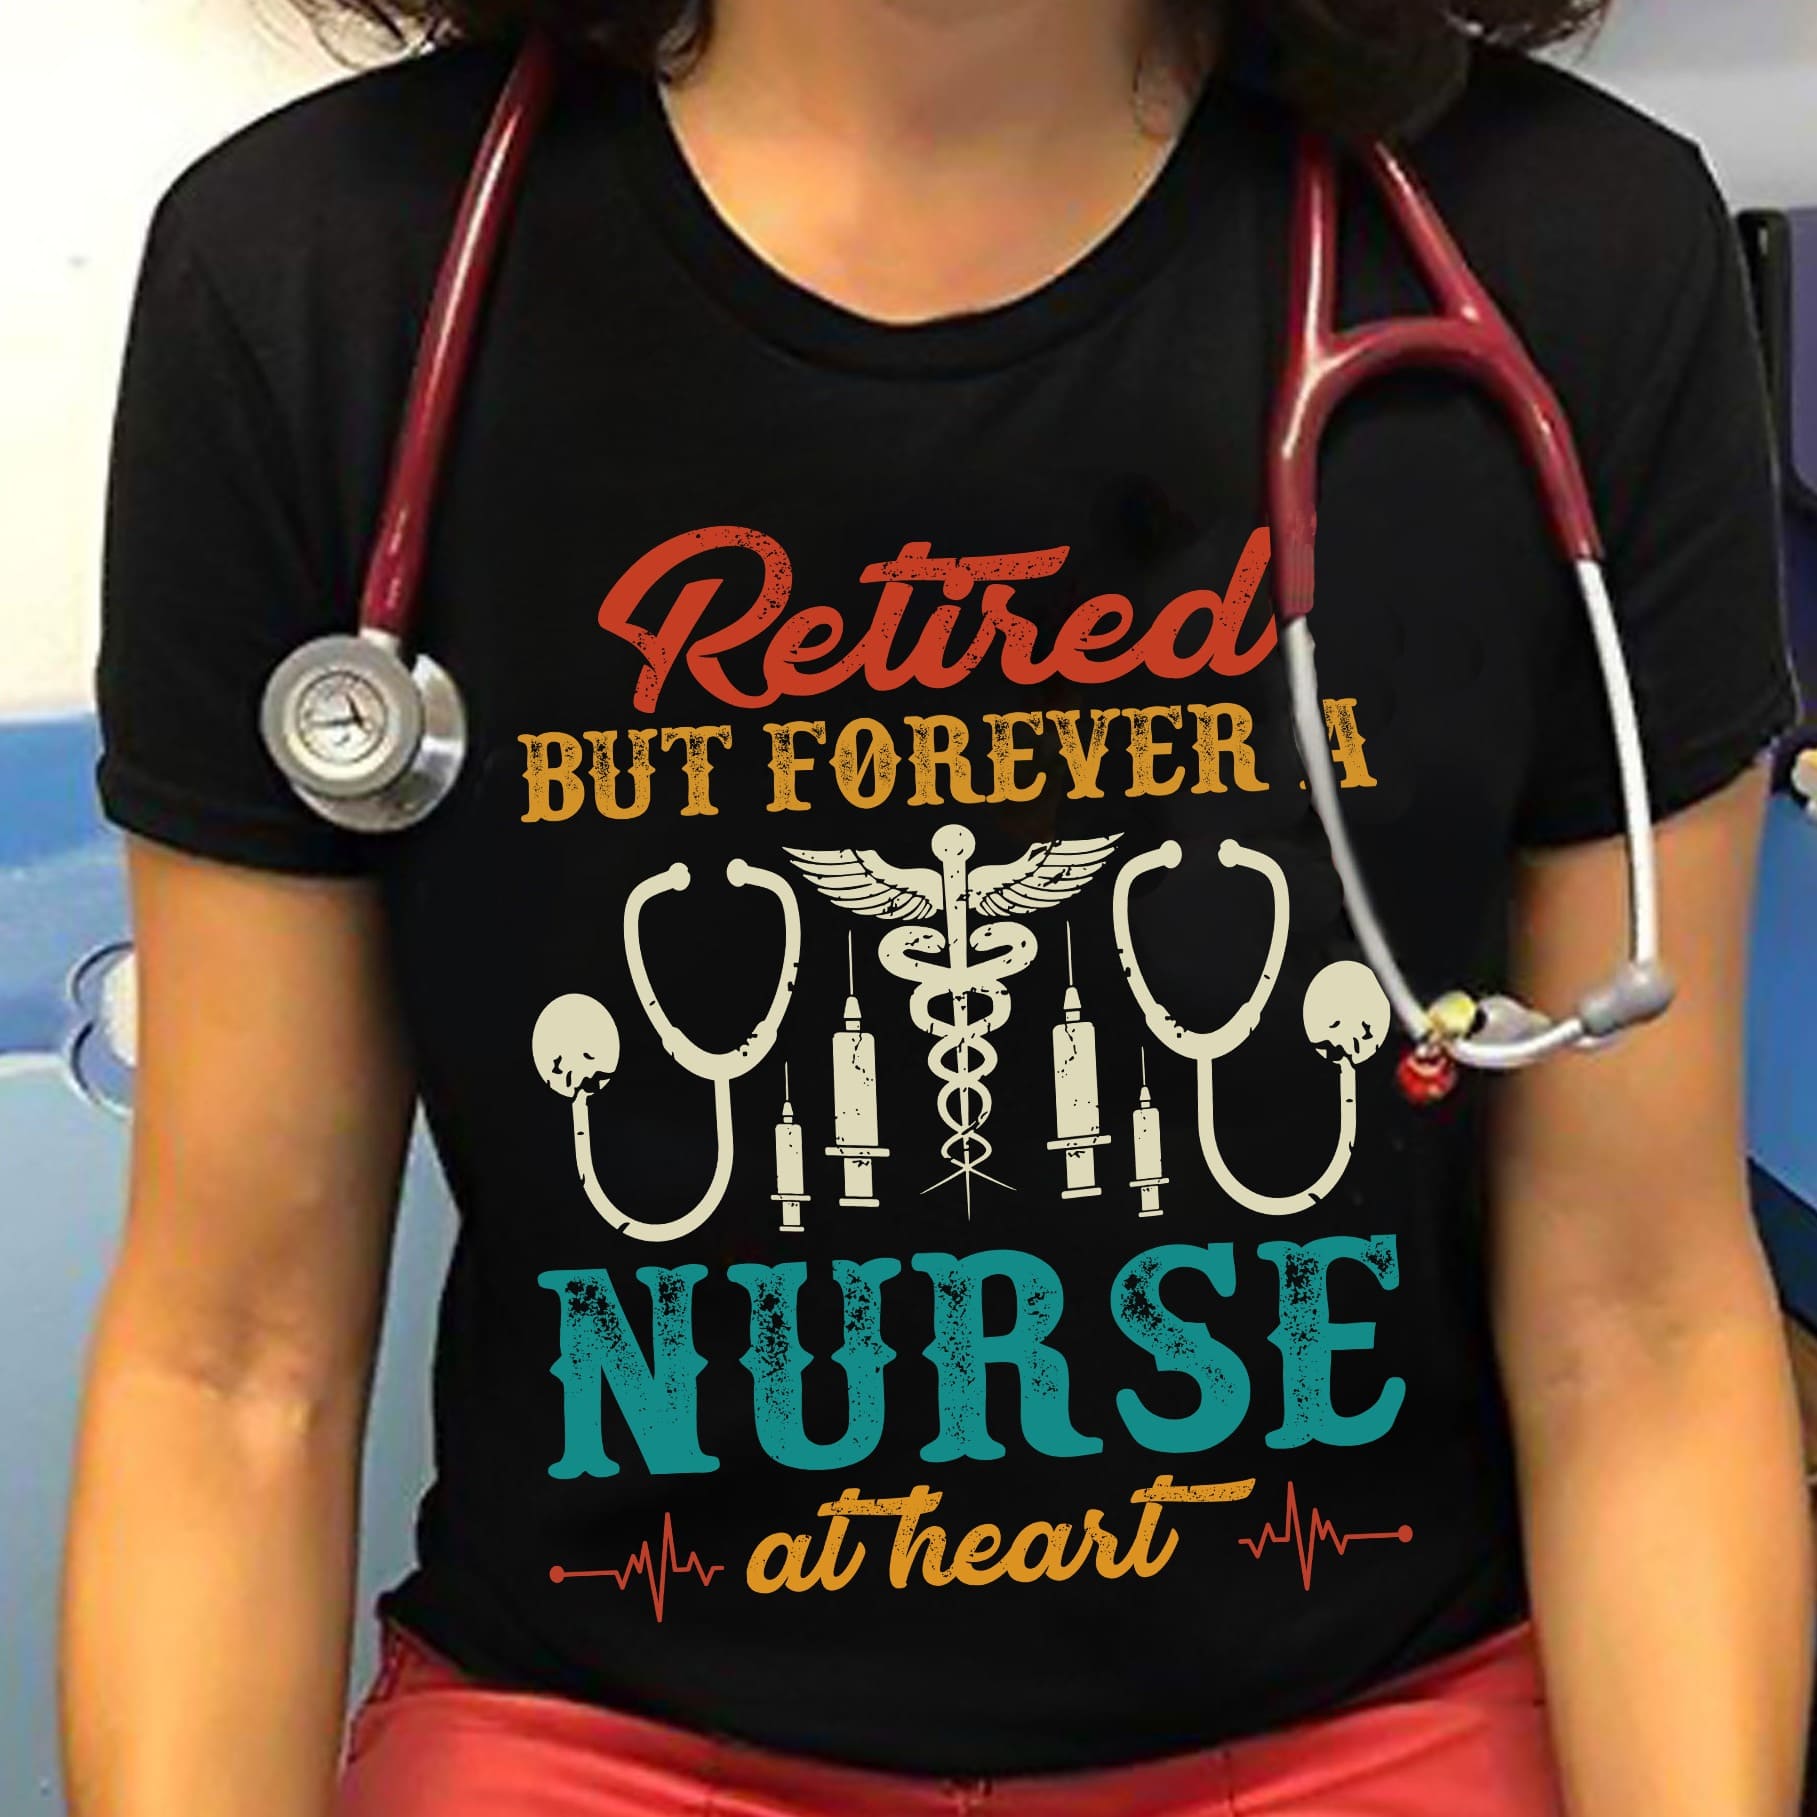 CNA Nurse The Job - Retired but forever a nurse at heart